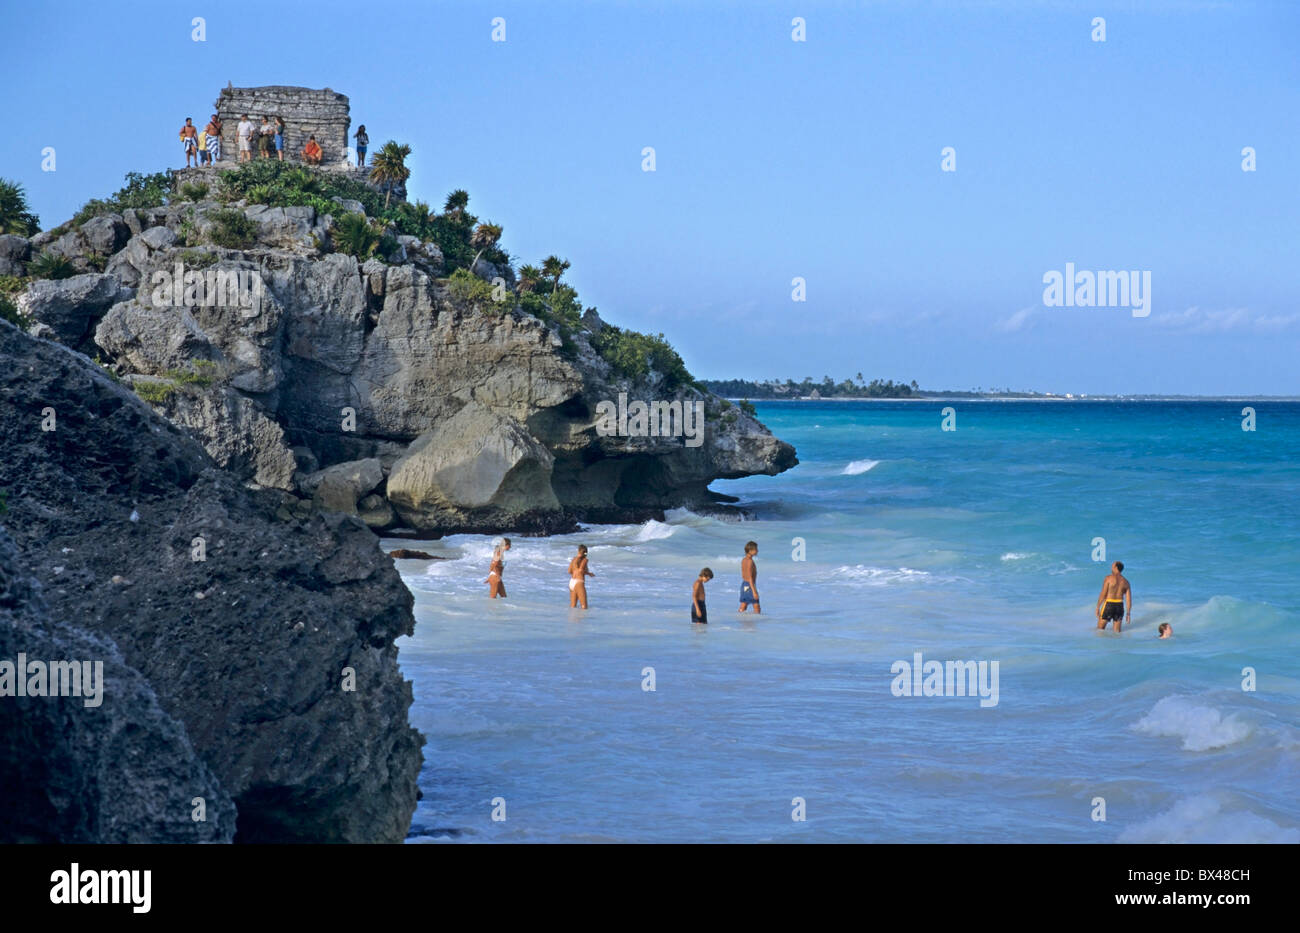 Tulum, Quintana Roo, Yucatan Peninsula, Mexico - Bathers on the beach at the foot of an ancient Mayan site - at dusk. Stock Photo